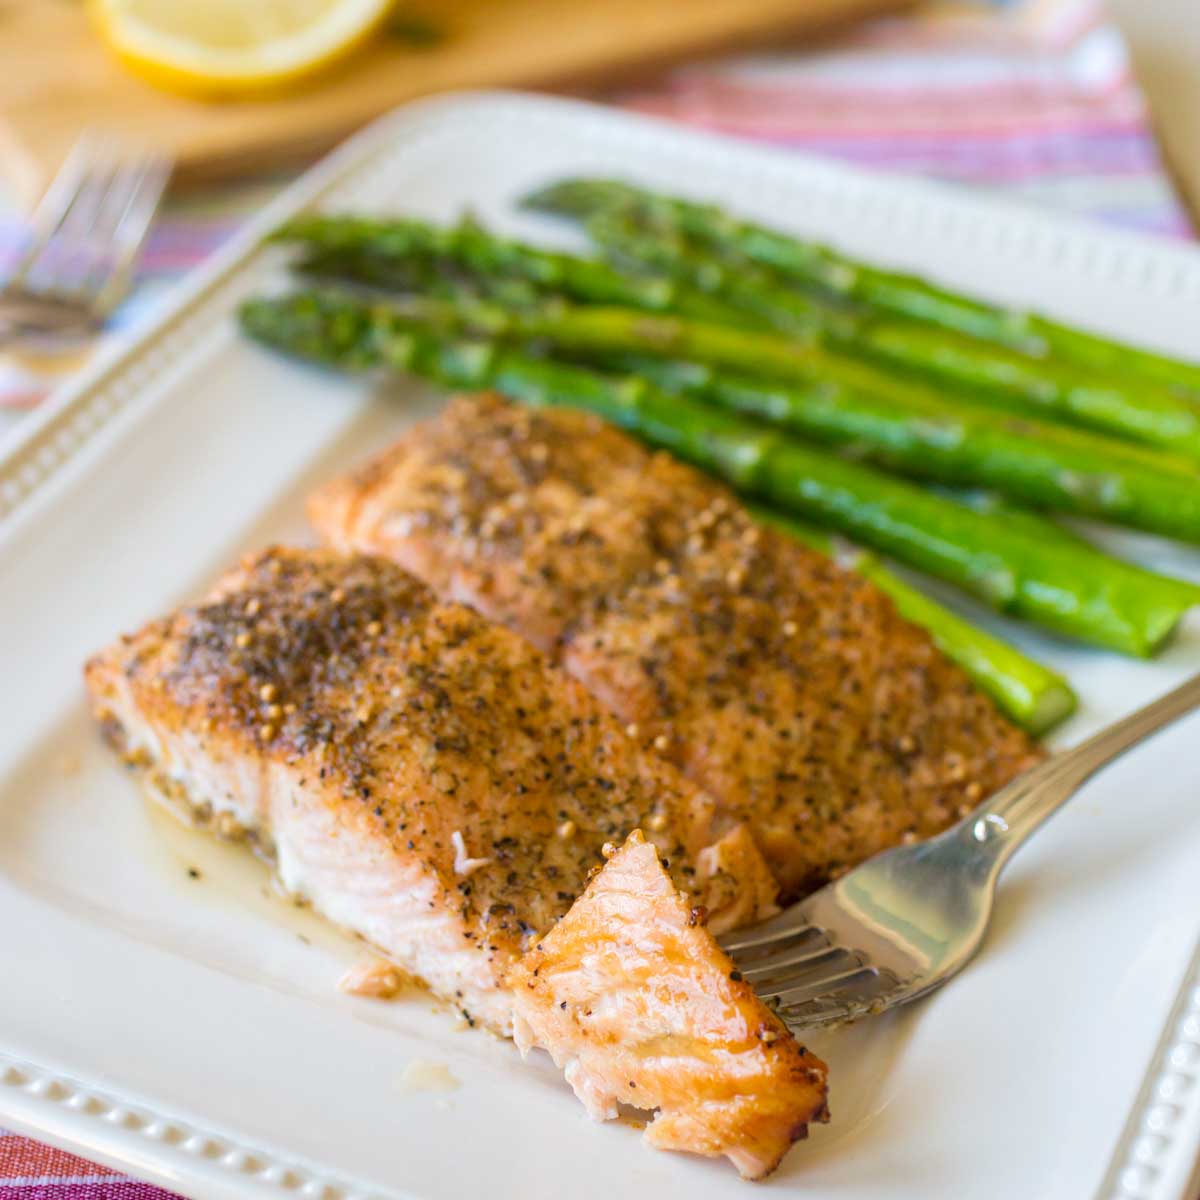 A platter of oven baked salmon next to roasted asparagus has a fork showing the flaky pink fish.